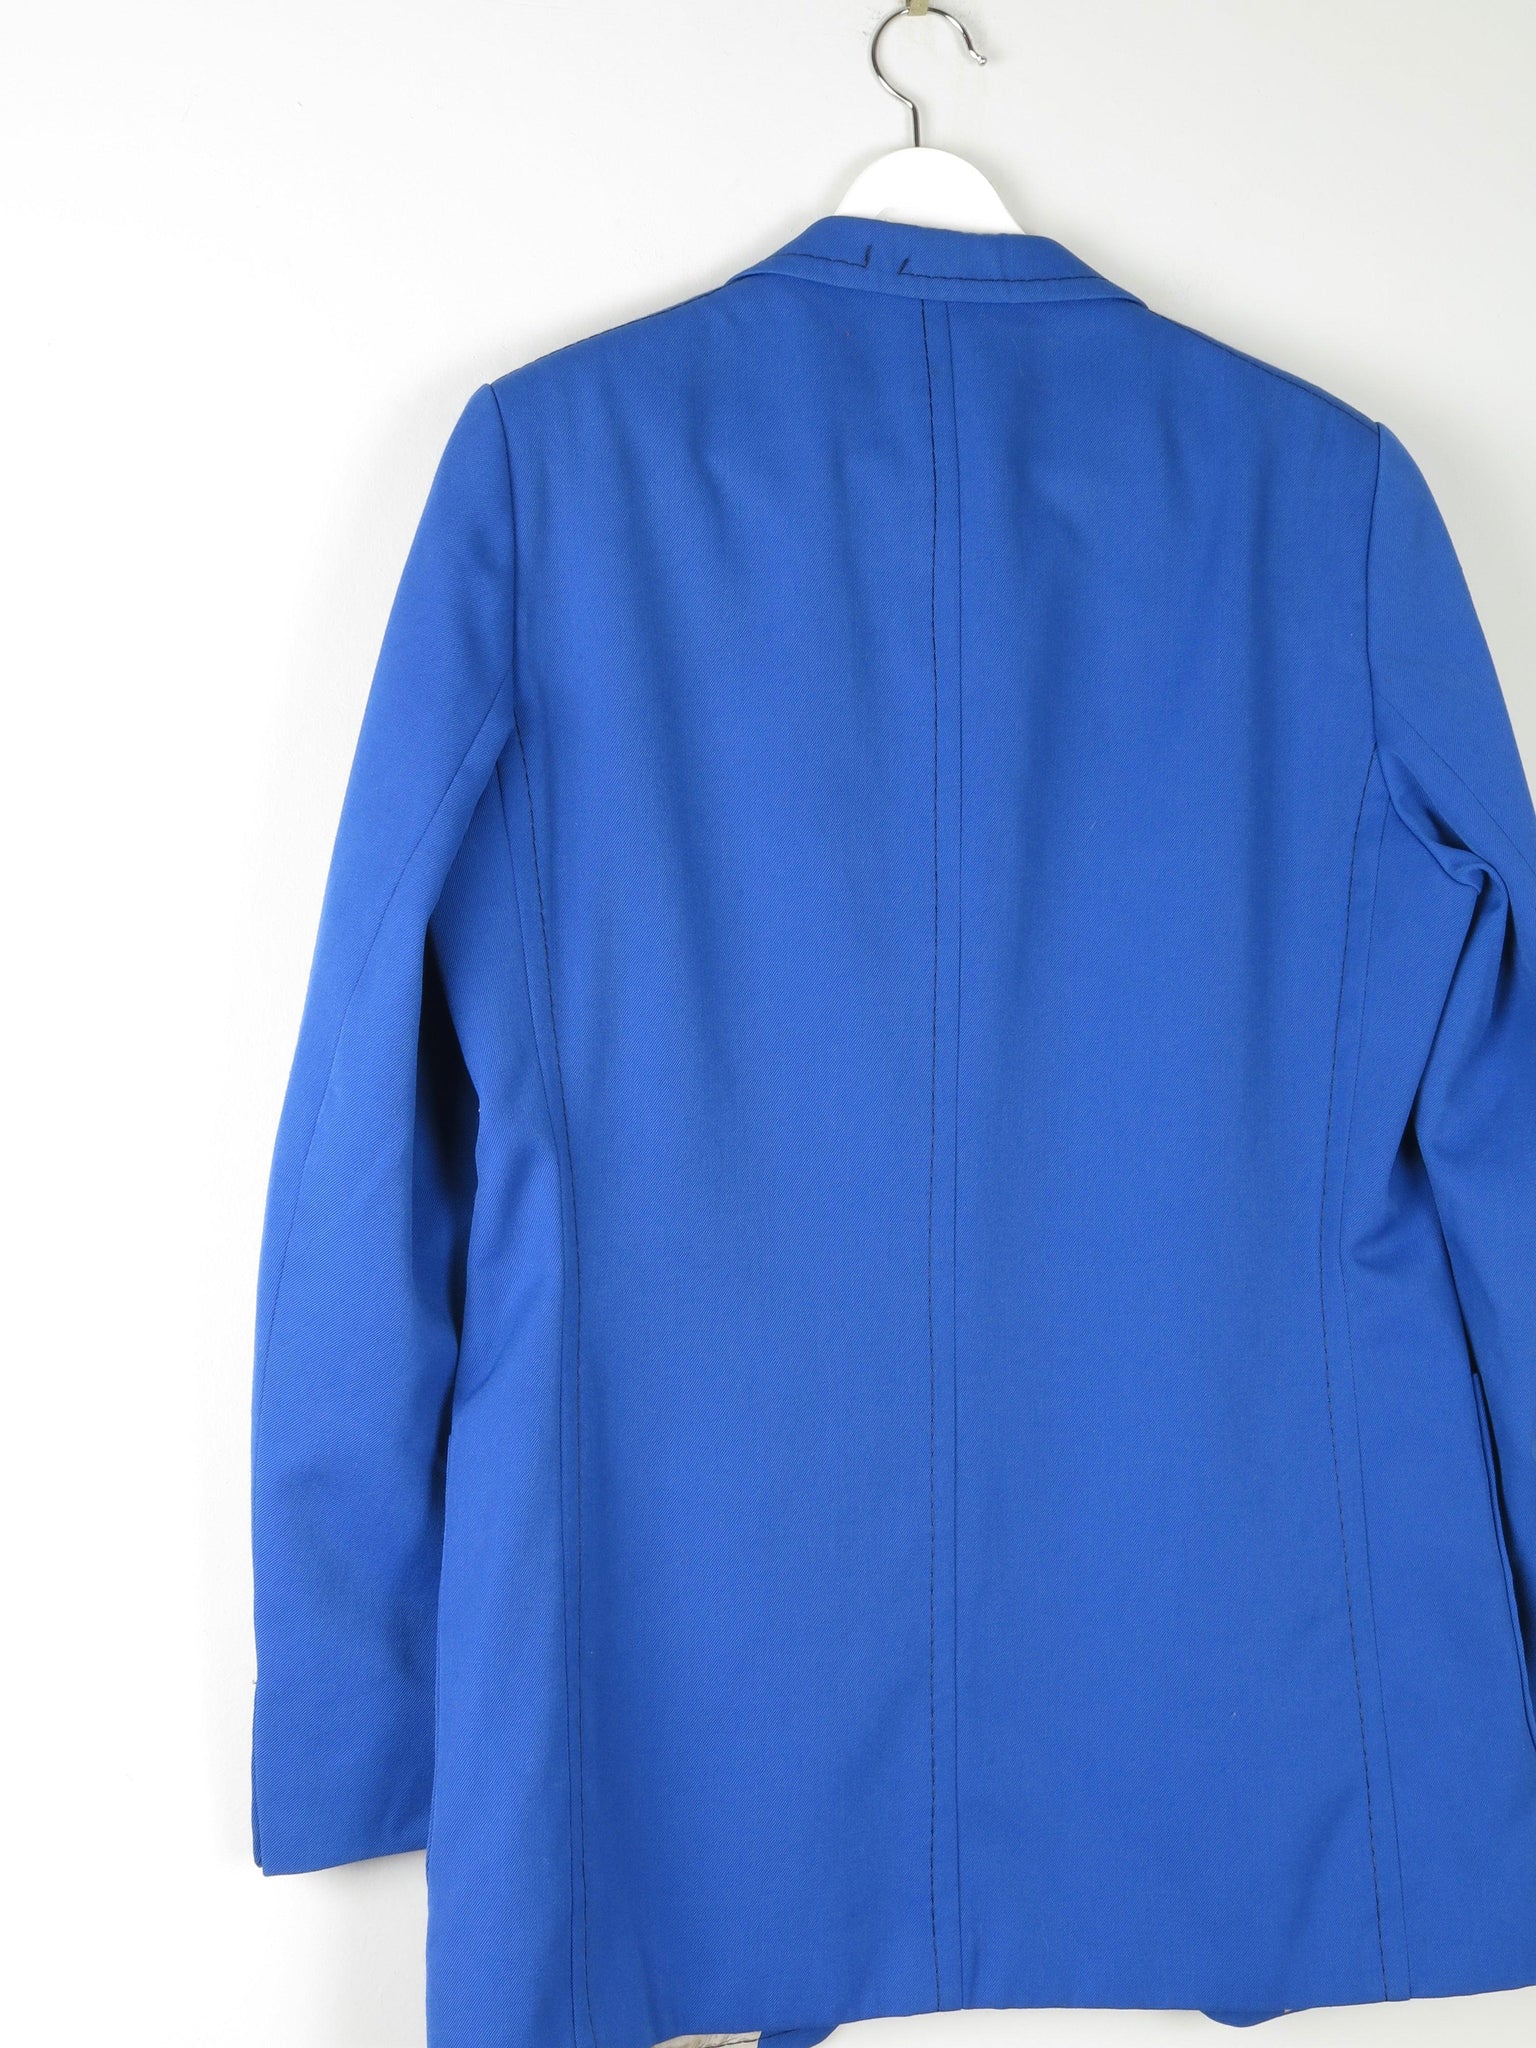 Men's 1970s Electric Blue Tailored Jacket 40" - The Harlequin